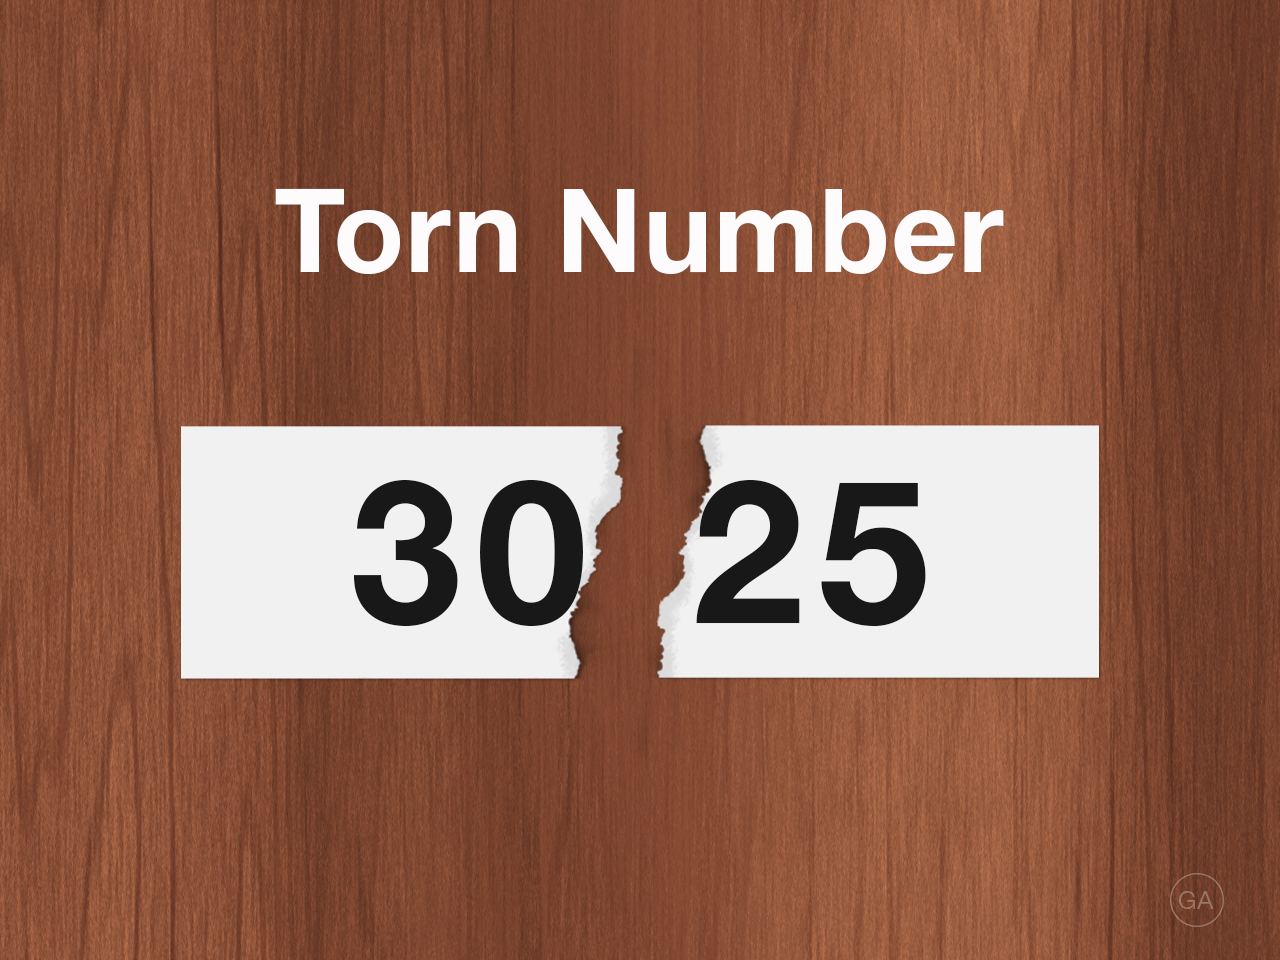 Torn Number.png